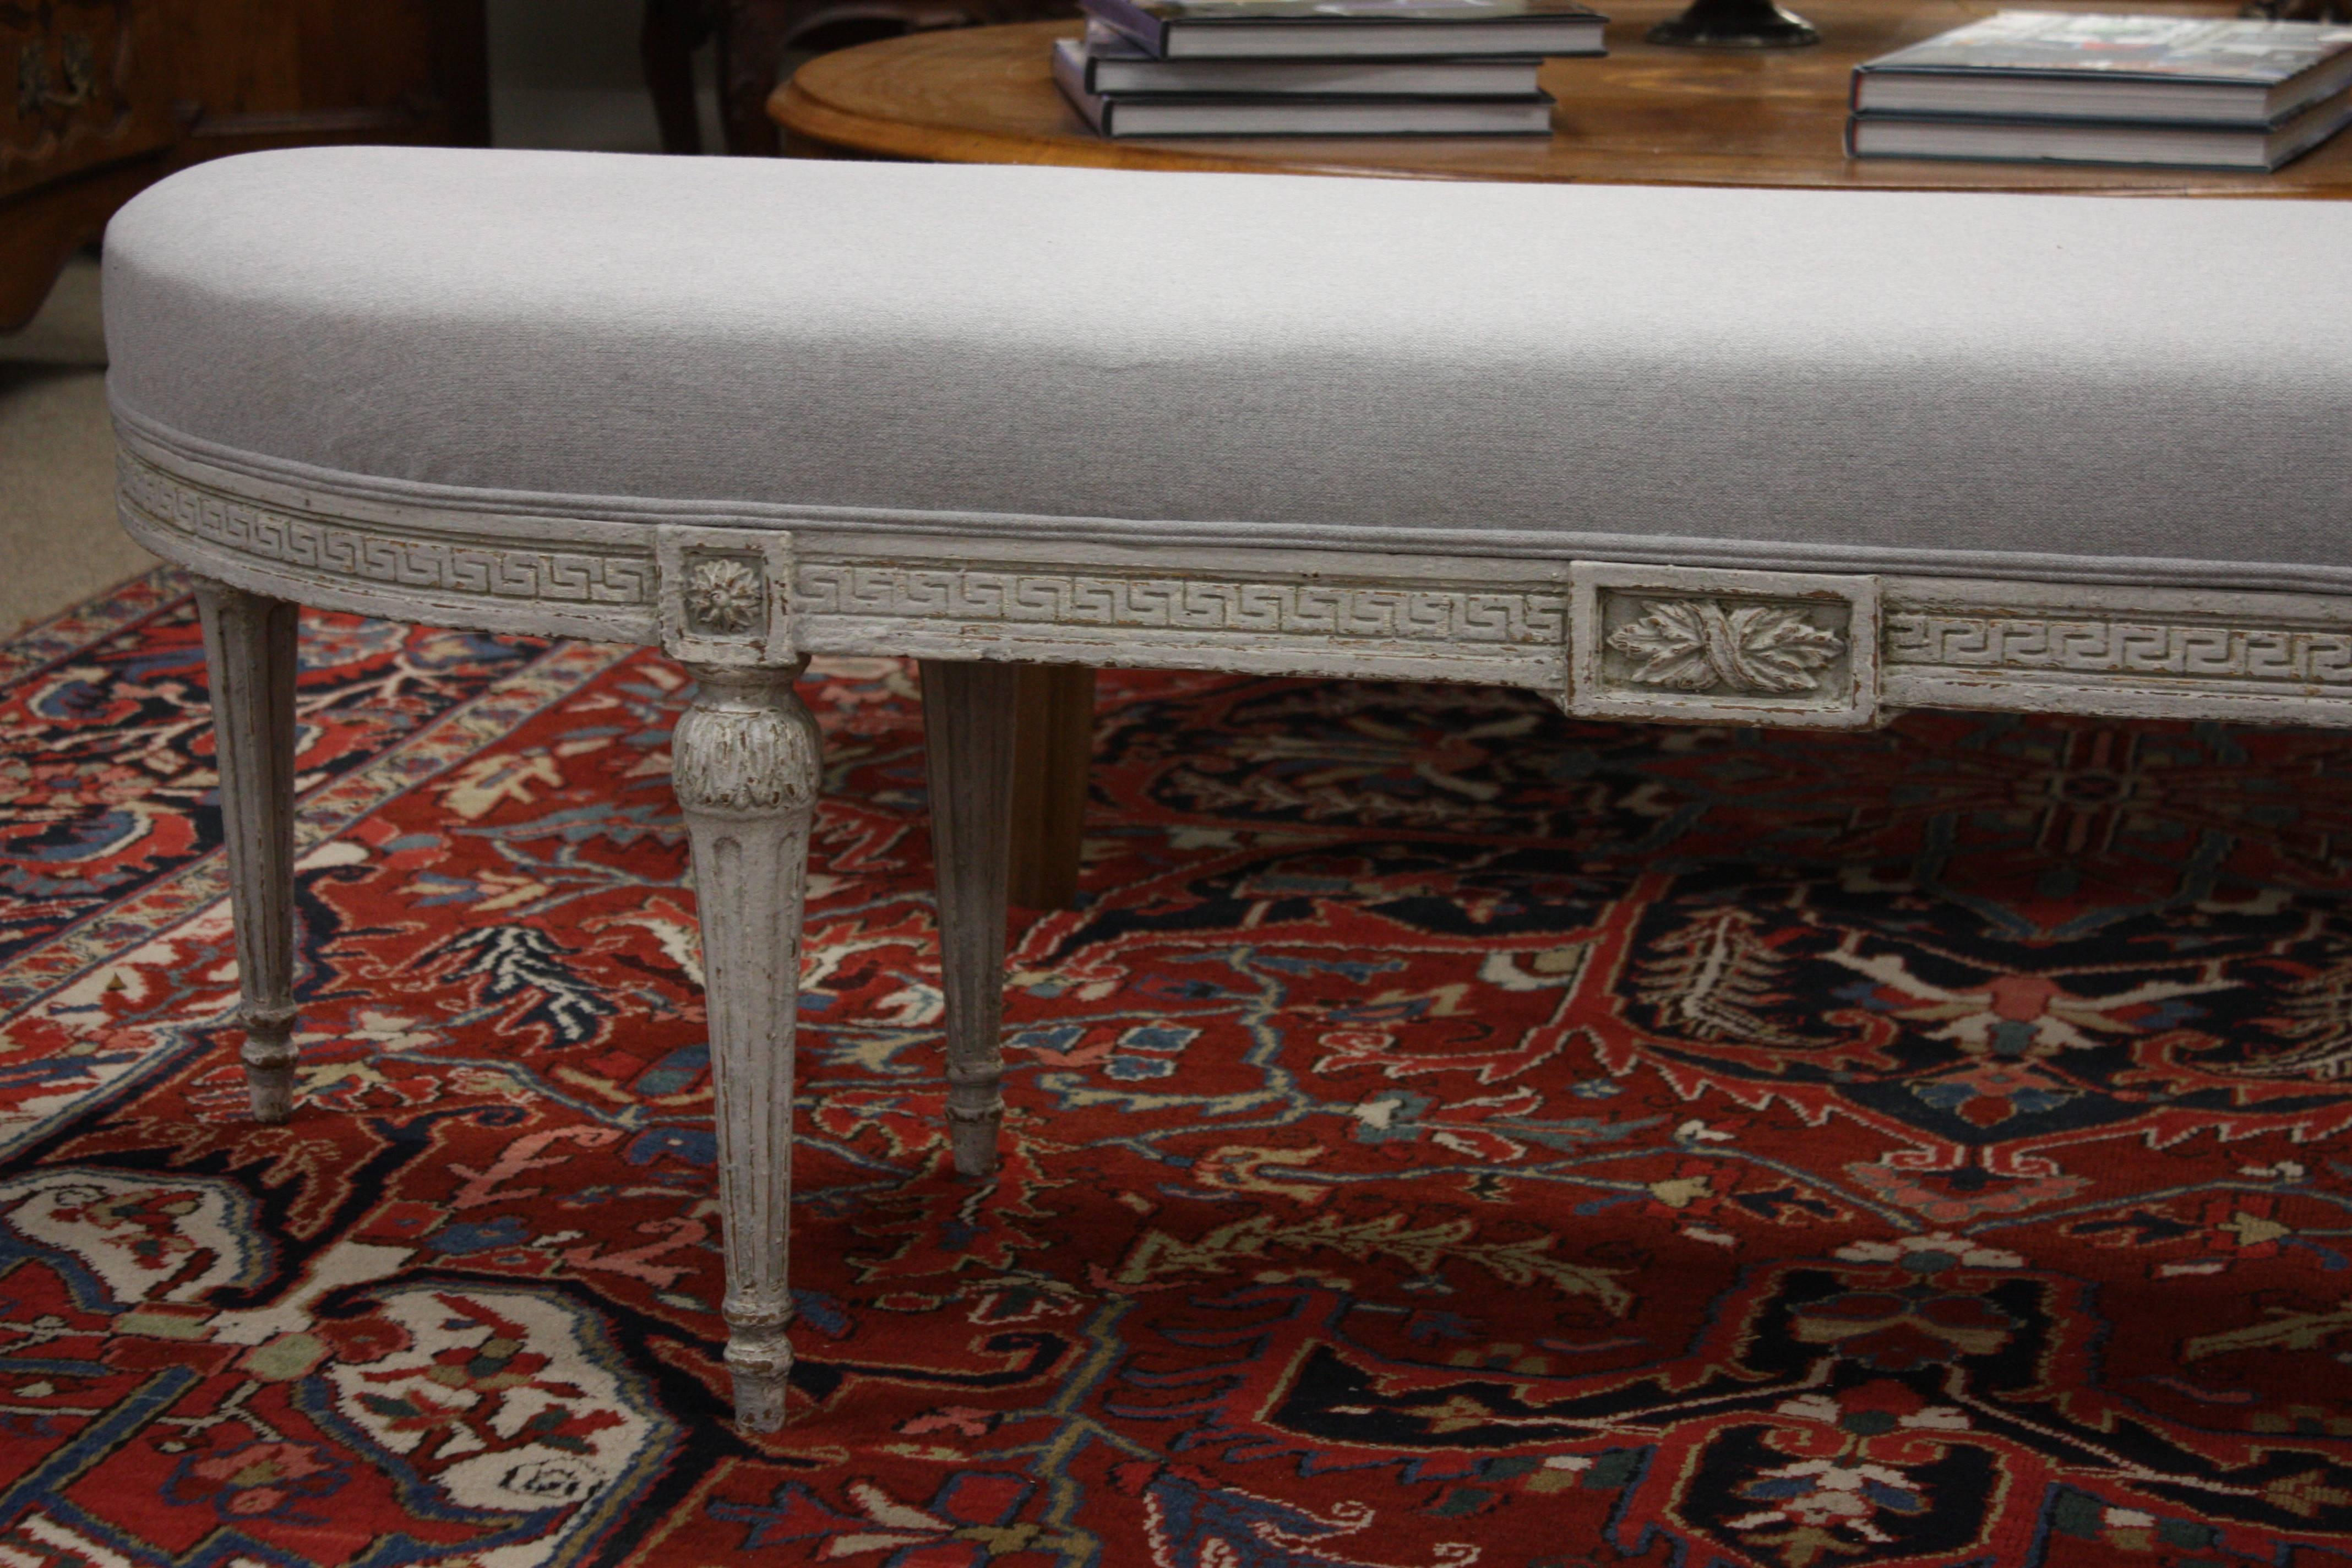 Louis XVI bench from France. Carved, circa 1910, the antique bench has six tapered legs, Greek key carvings around the apron, and is reupholstered in a neutral grey. Due to its size and narrow profile, the bench would also make the perfect piece at